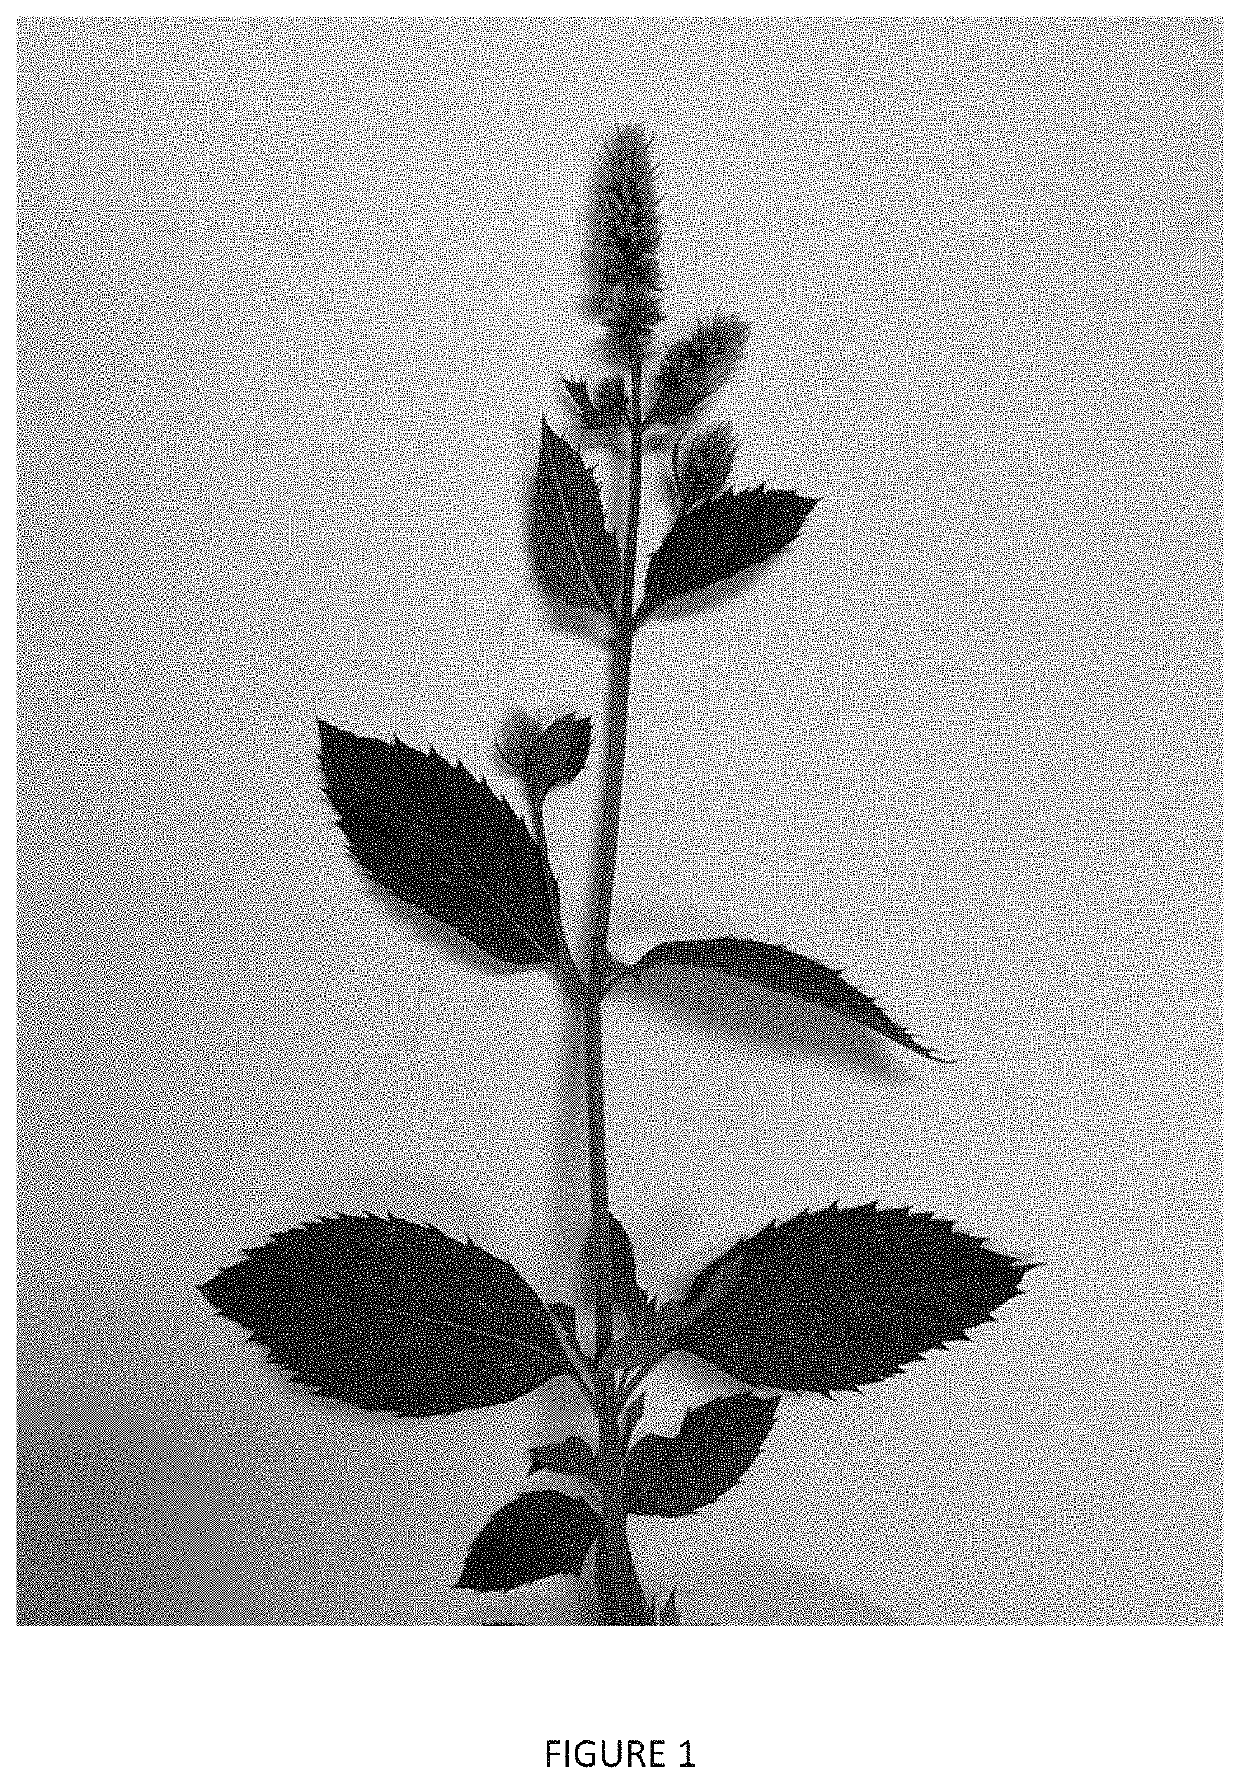 Mentha Plant Named 'Columbia'